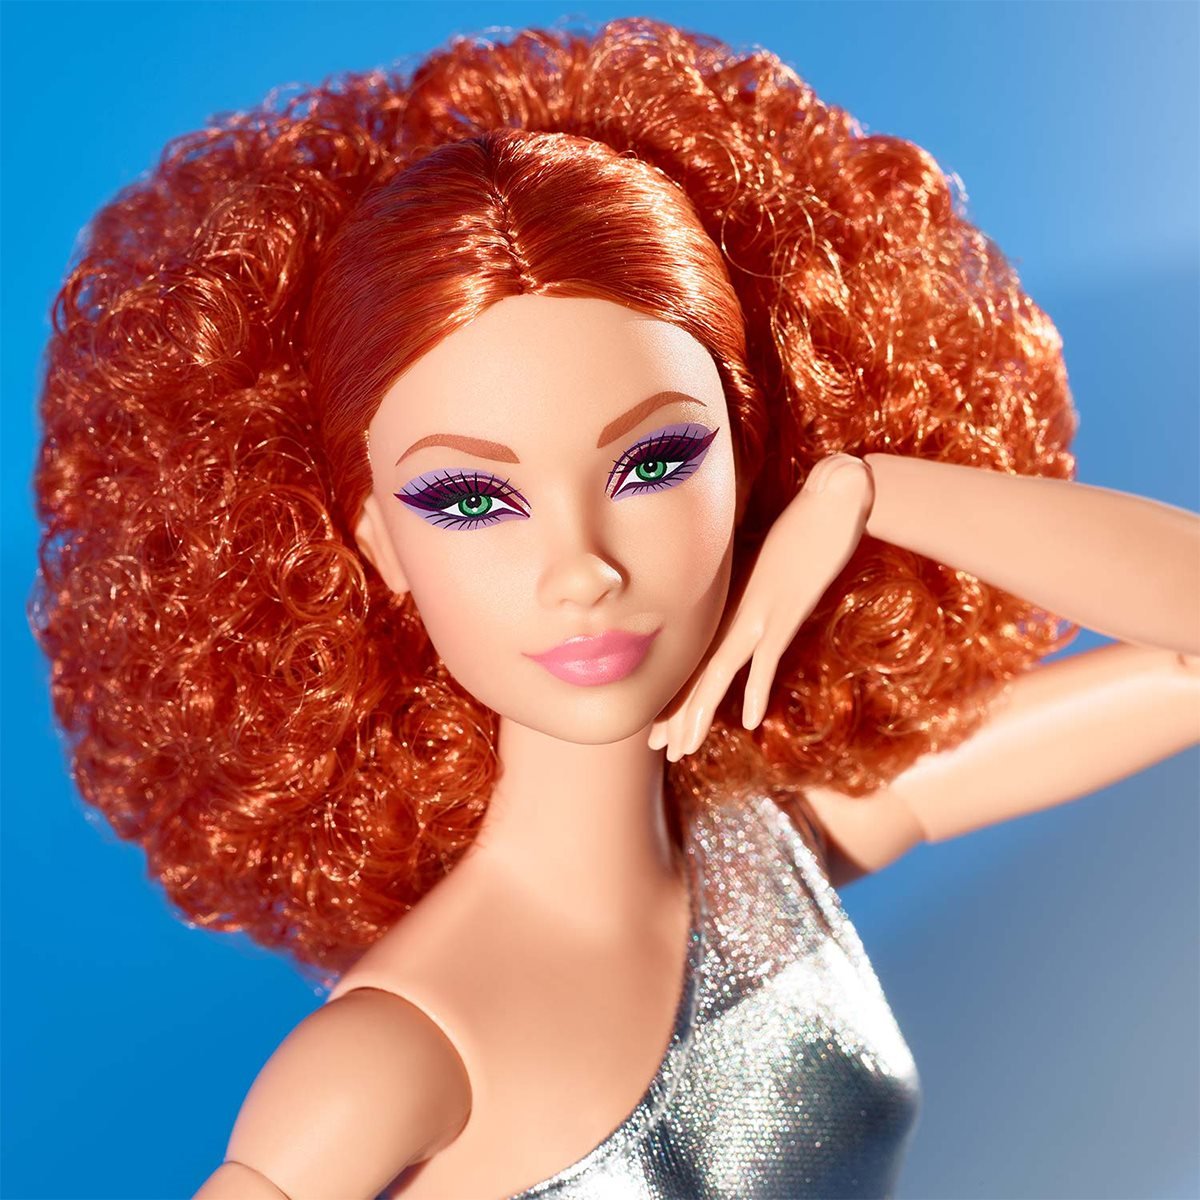 Barbie Styling Head with Blonde Hair - Entertainment Earth